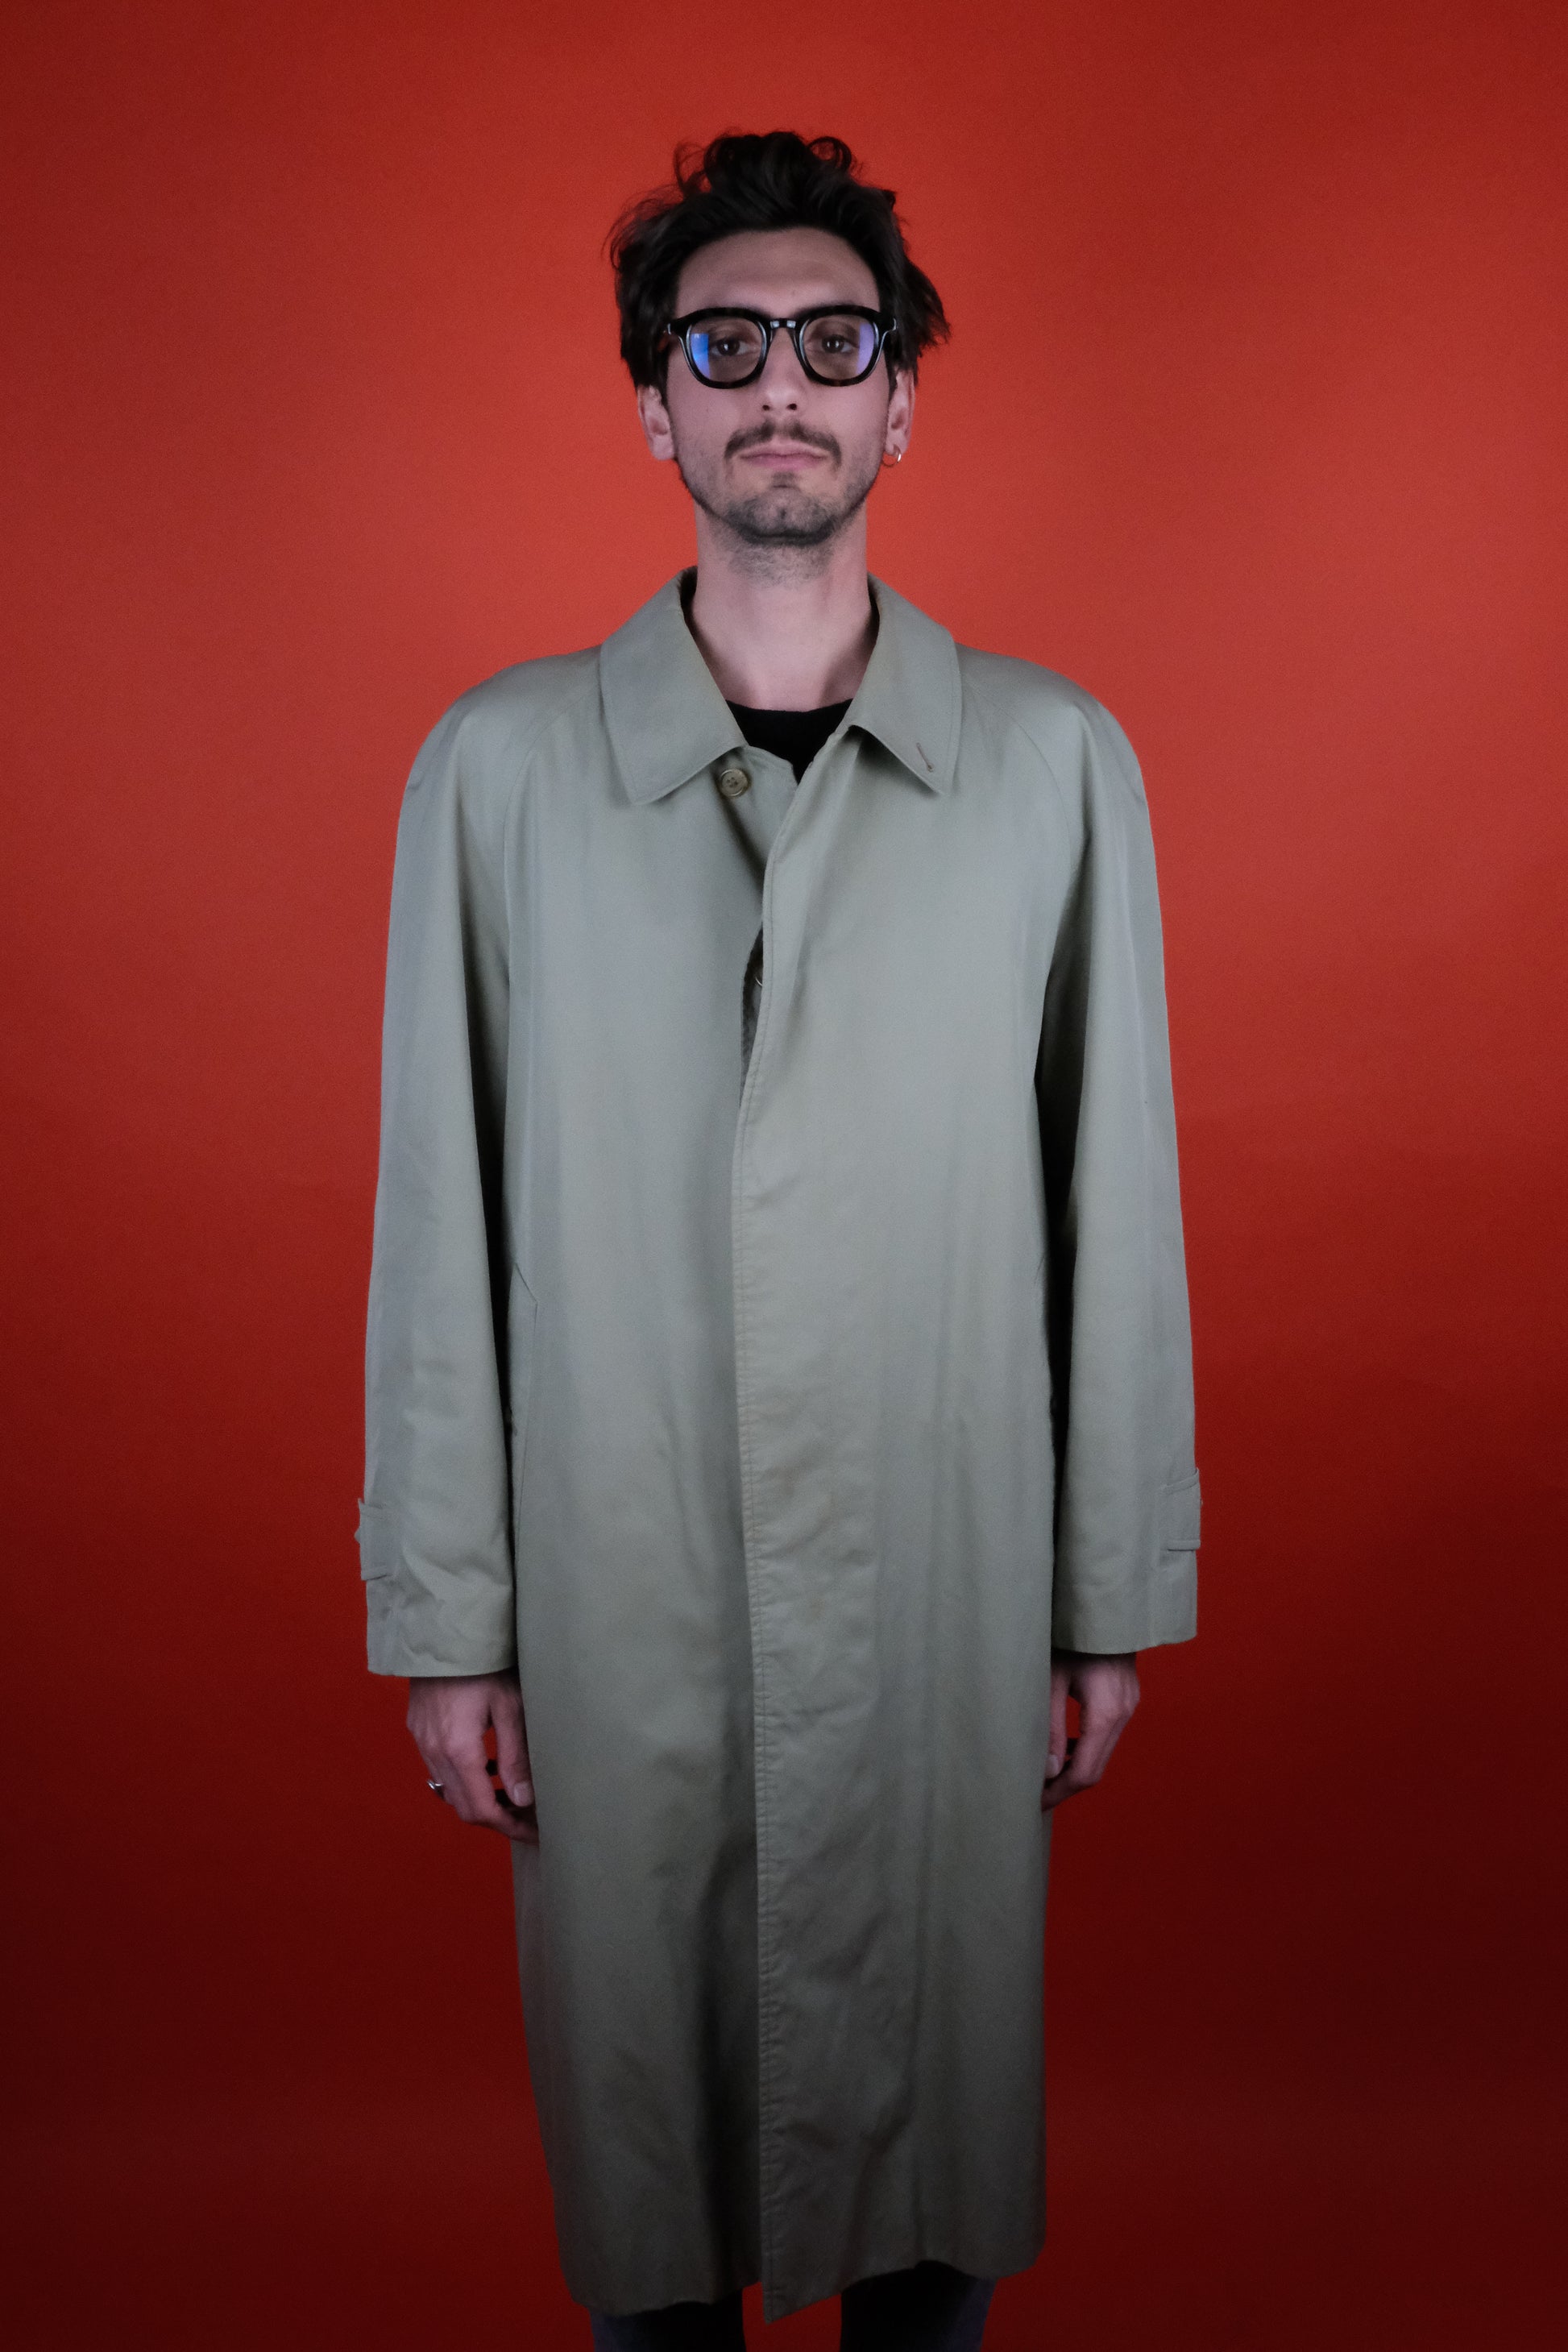 Burberrys' Beige Trench Coat 'L' Made in England  - vintage clothing clochard92.com